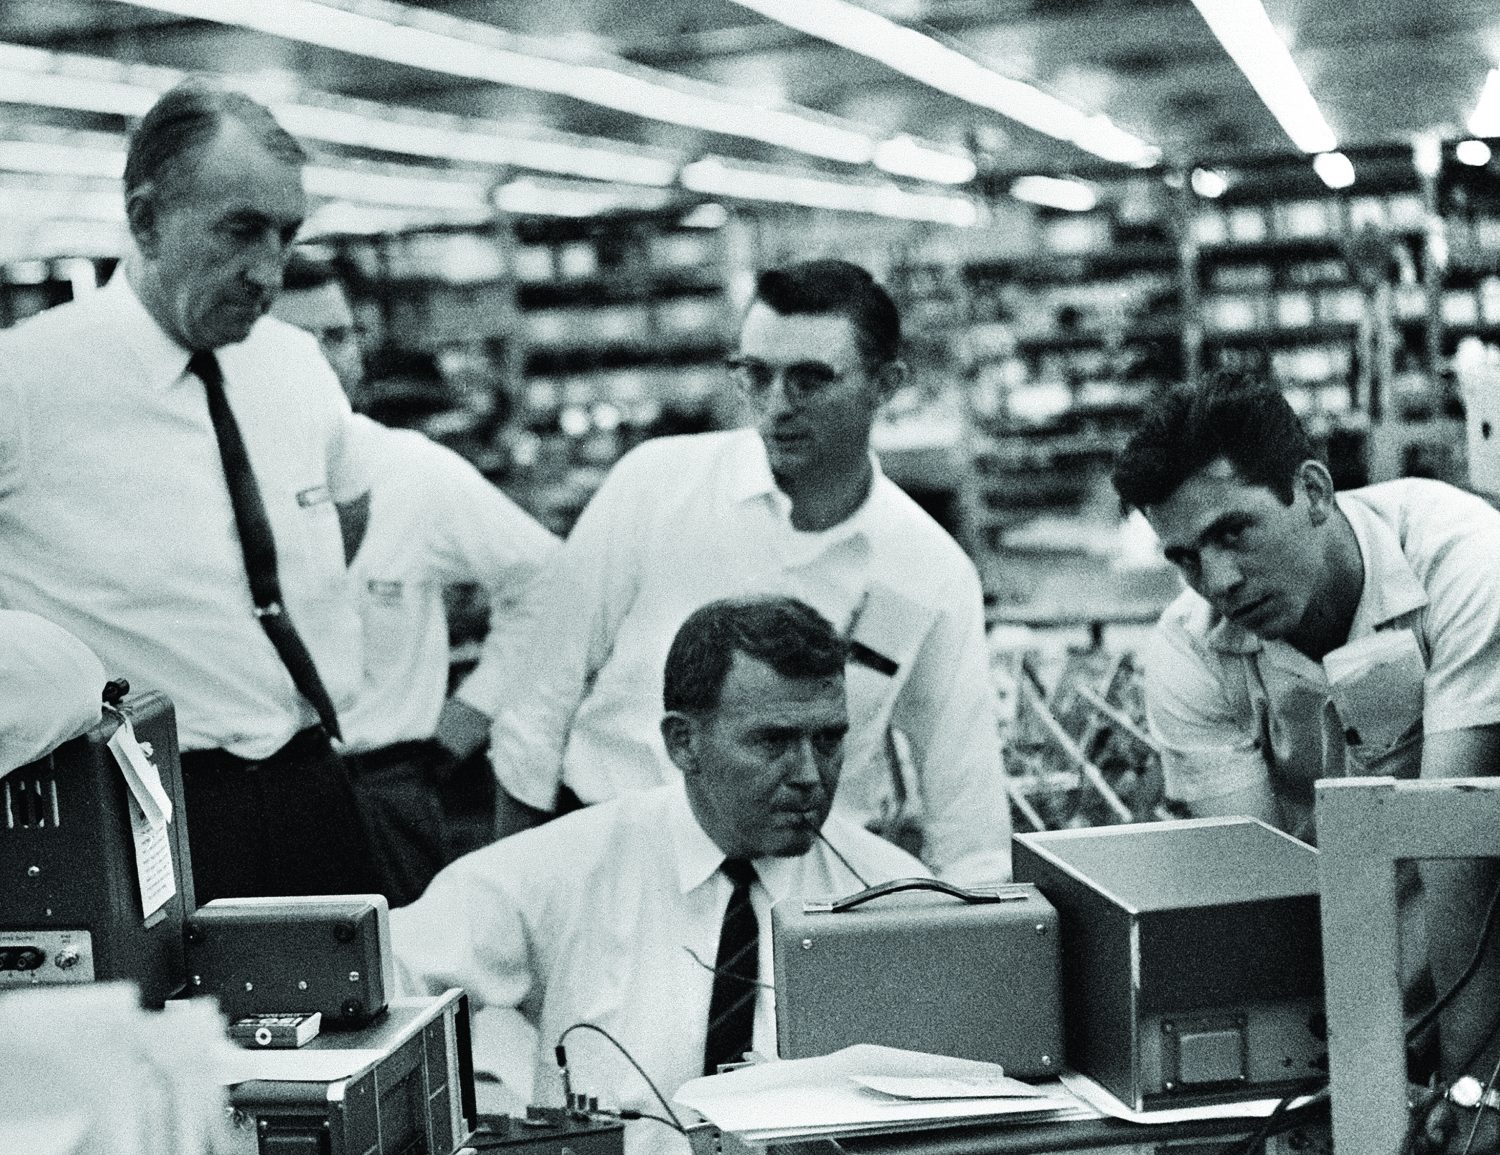 Bill Hewlett and Dave Packard interacting with employees. Hewlett is tinkering with an instrument while the others look on. 